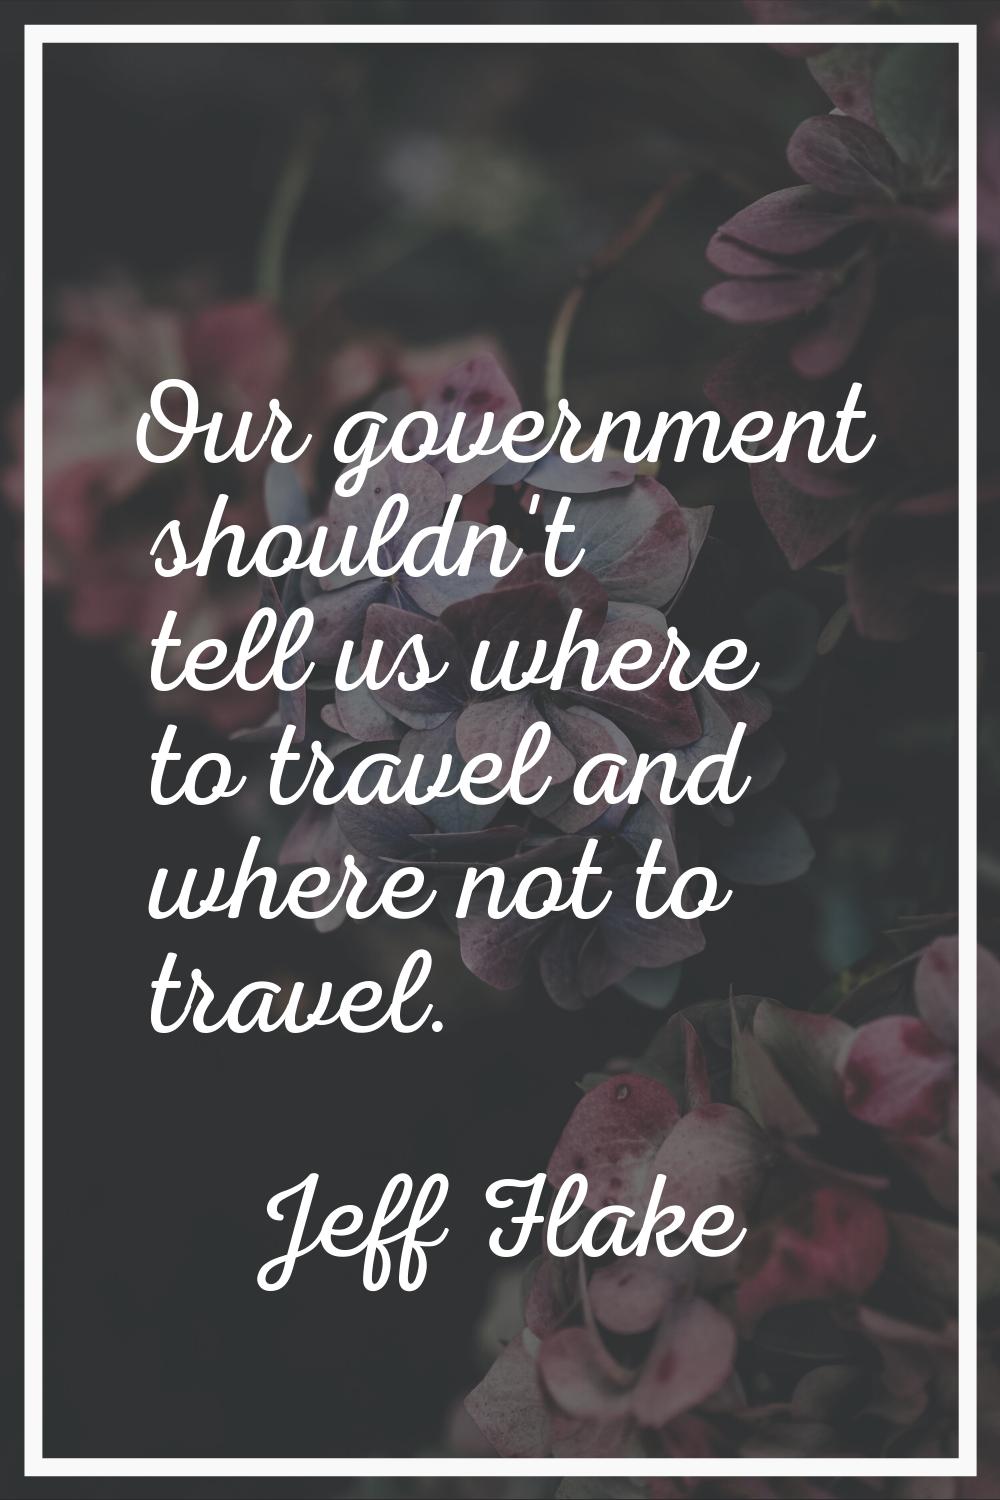 Our government shouldn't tell us where to travel and where not to travel.